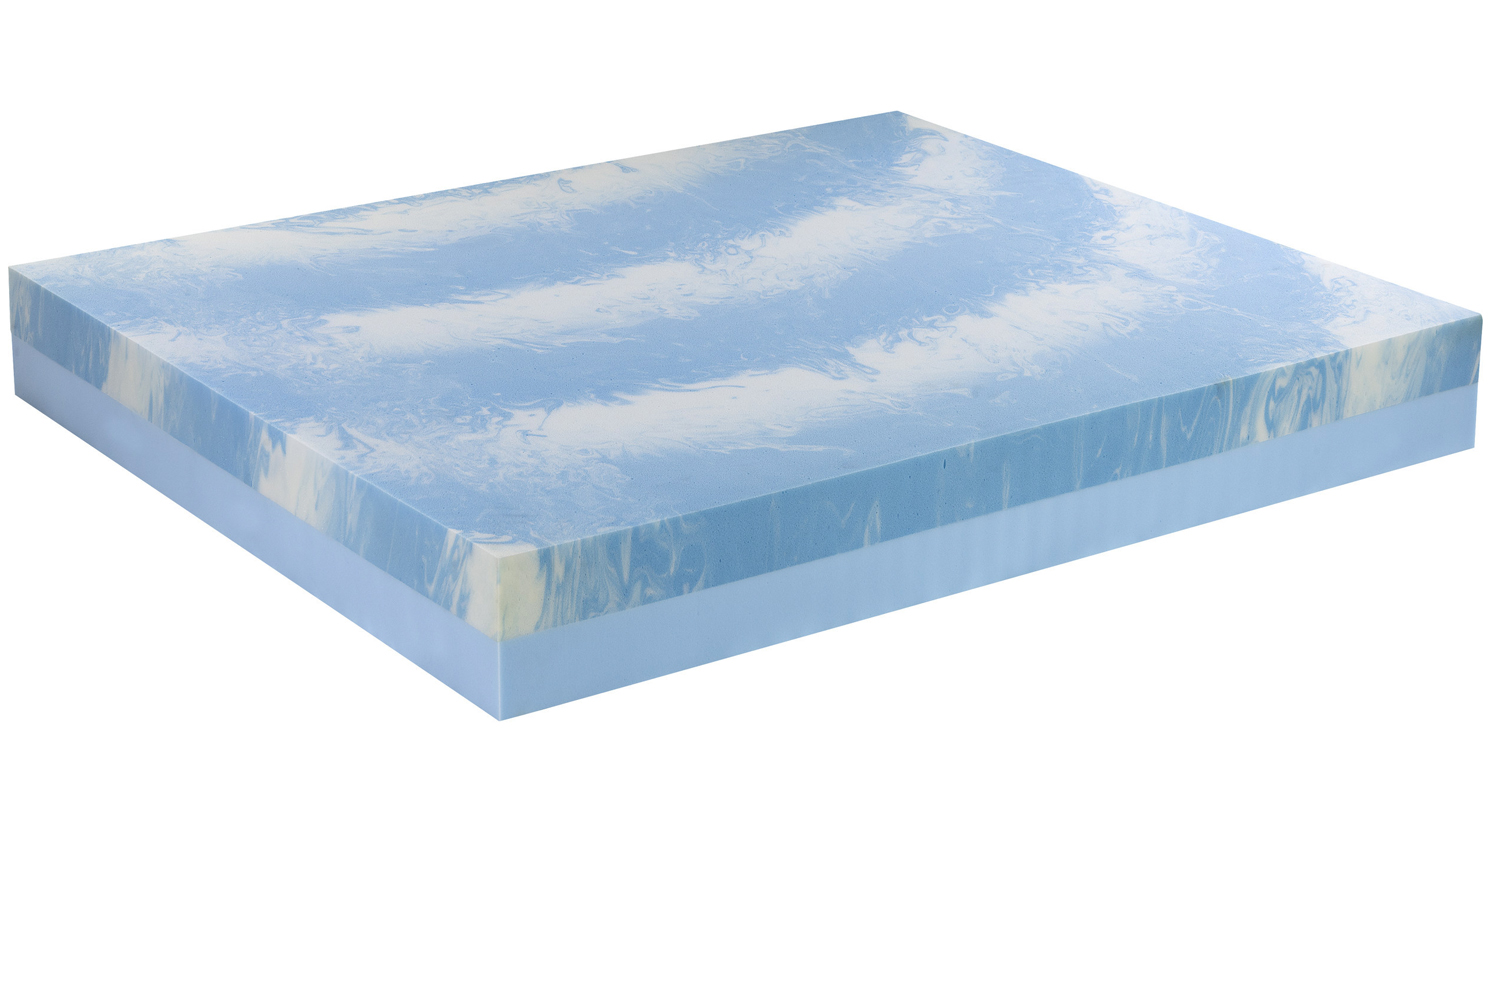 The internal structure of this foam features an open-cell construction which increases airflow within the mattress for enhan